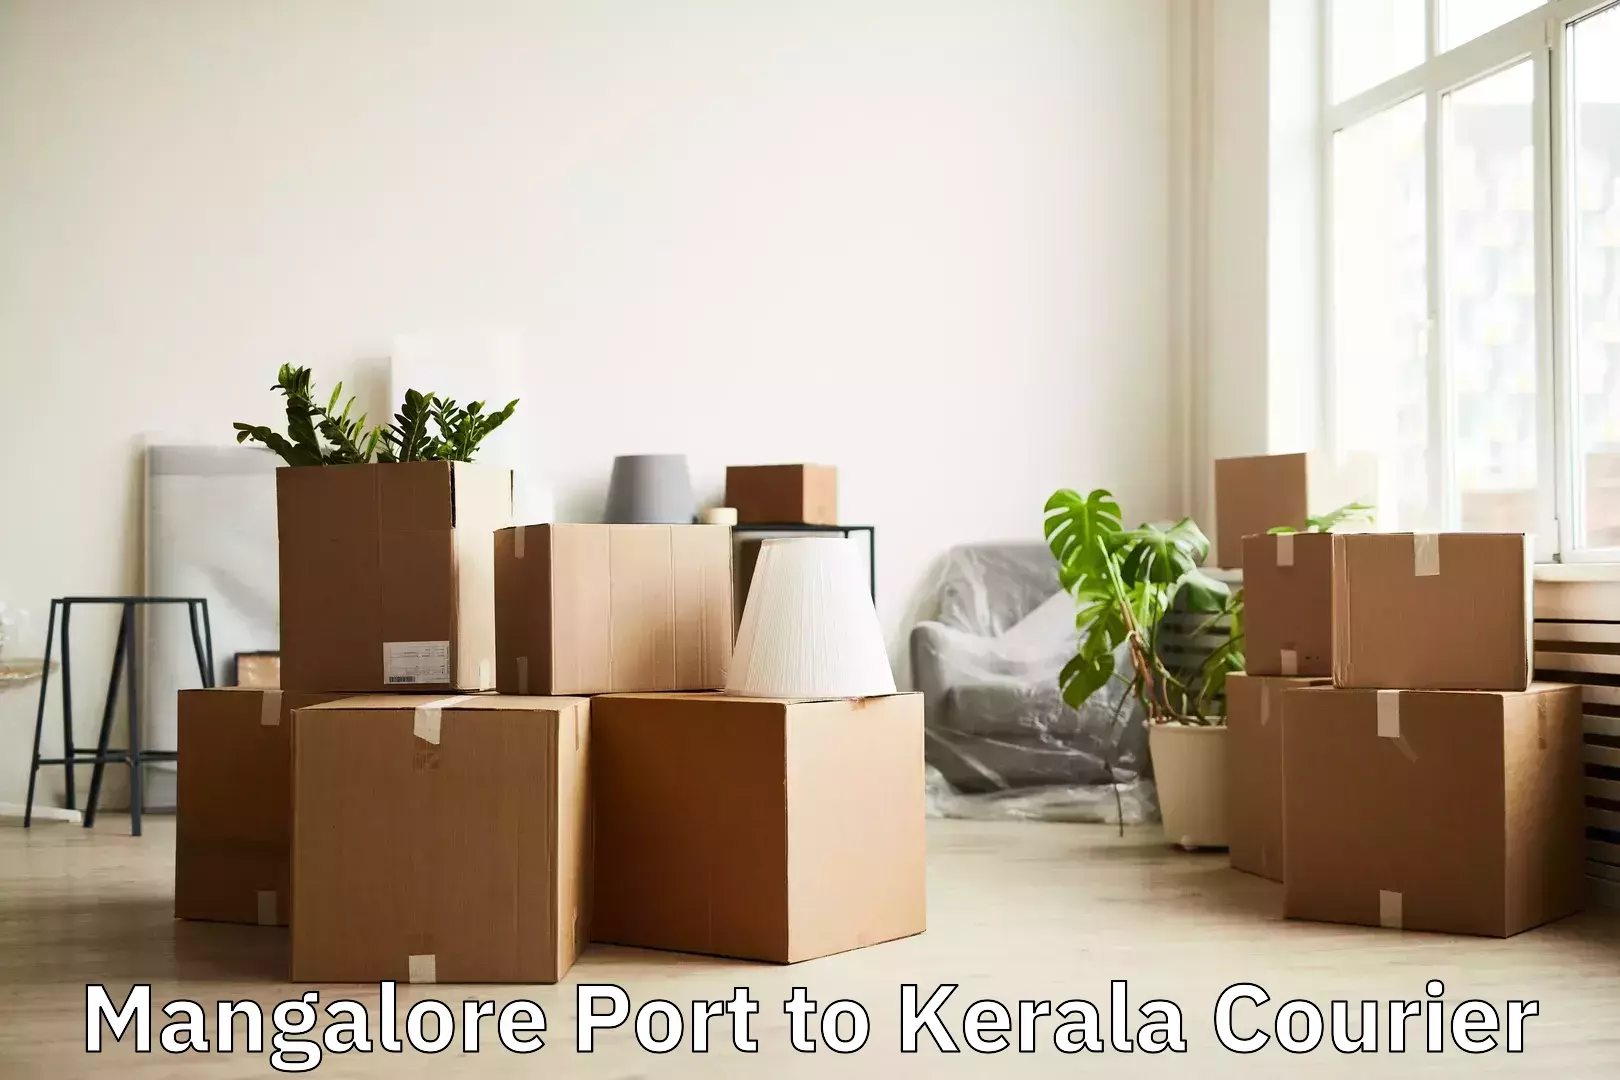 Emergency baggage service in Mangalore Port to Kerala